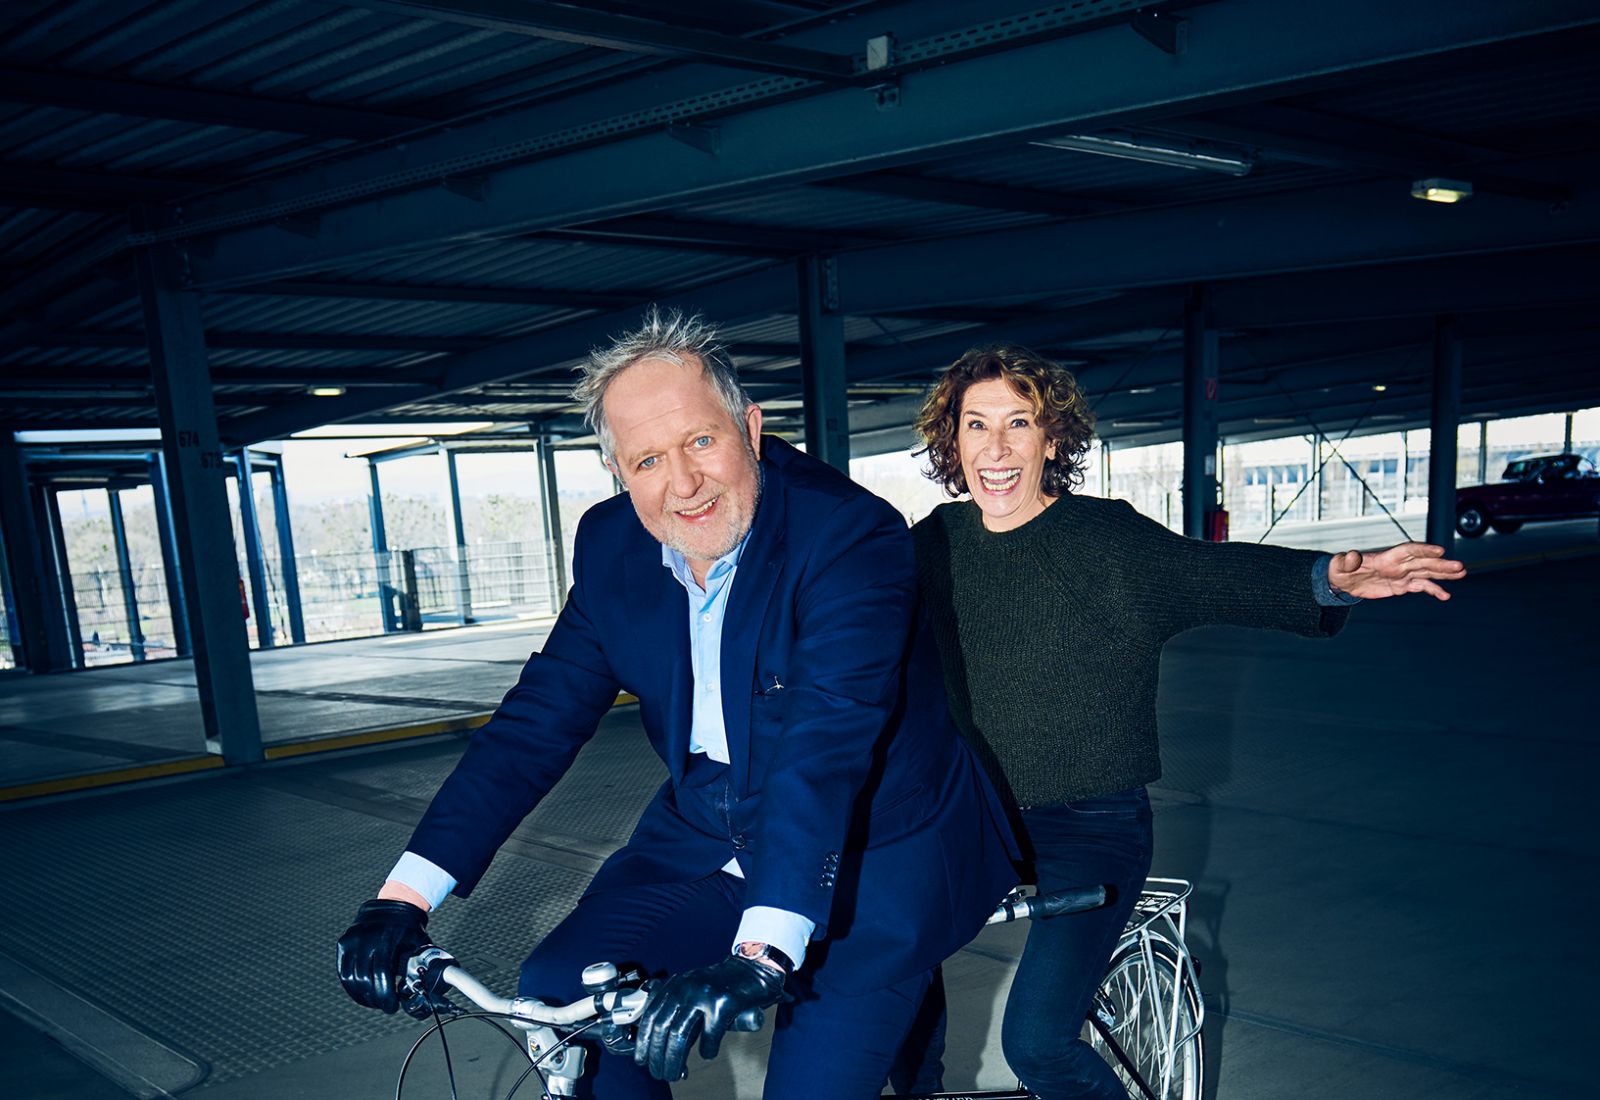 Harald Krassnitzer and Adele Neuhauser driving on a tandem